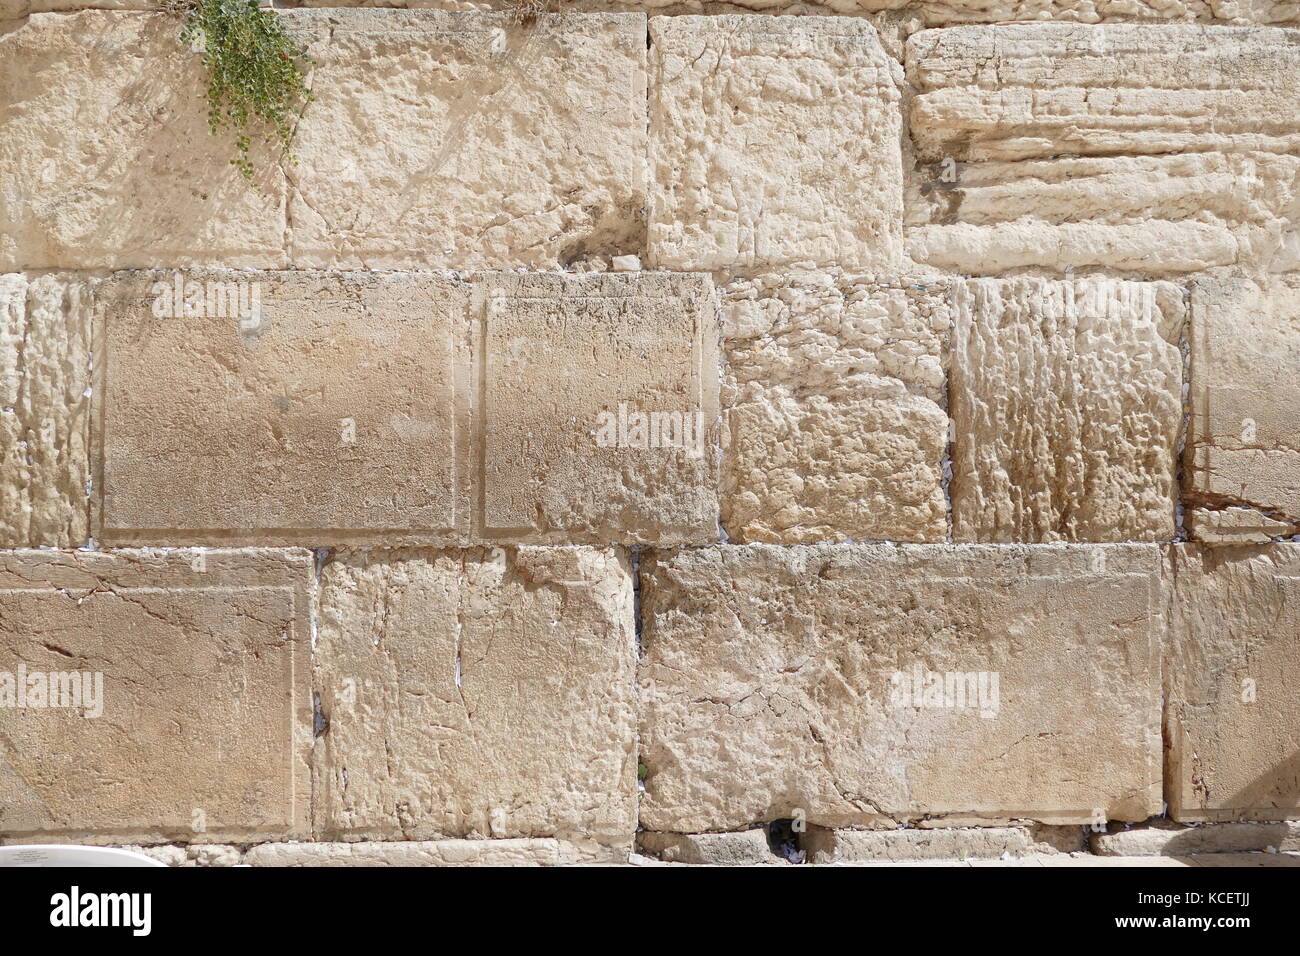 Slips of paper containing prayers in the cracks of the Western Wall (Ha-Kotel Ha-Ma'aravi) in Jerusalem. The Wall is the holiest of Jewish sites, sacred because it is a remnant of the Herodian retaining wall that once enclosed and supported the Second Temple. It has also been called the 'Wailing Wall' Stock Photo